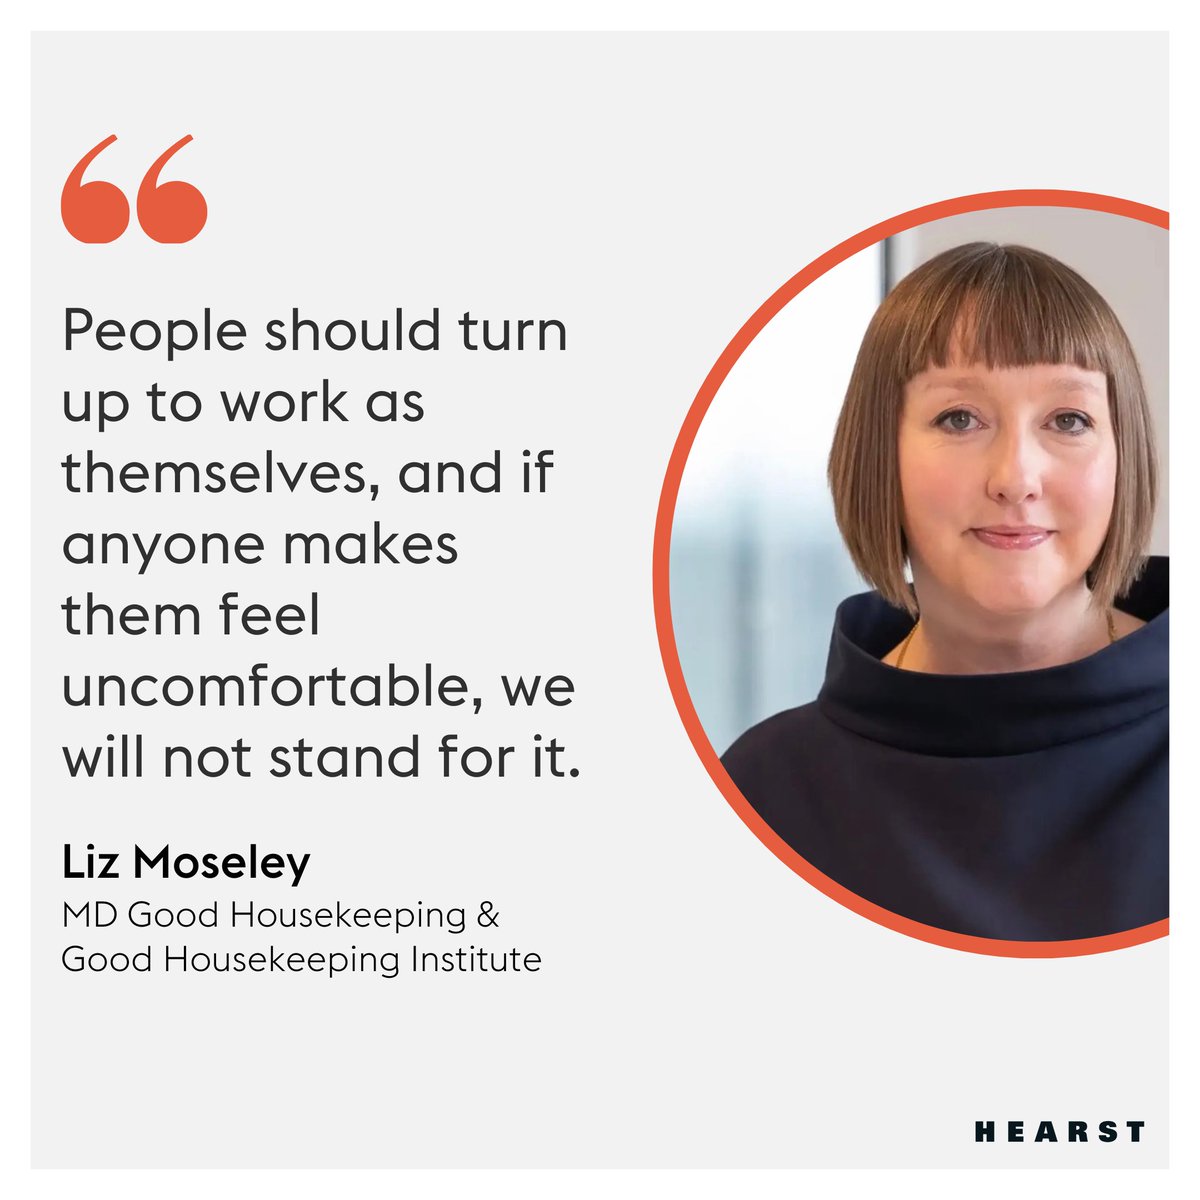 Liz Moseley, MD GH/GHI, recently spoke to @myGwork and @DIVAmagazine about LGBTQIA+ belonging and representation here at Hearst UK. Don't miss her interview - you can read it here👇 bit.ly/3VMcgIa #hearstuk #myGwork #goodhousekeepinguk #representation